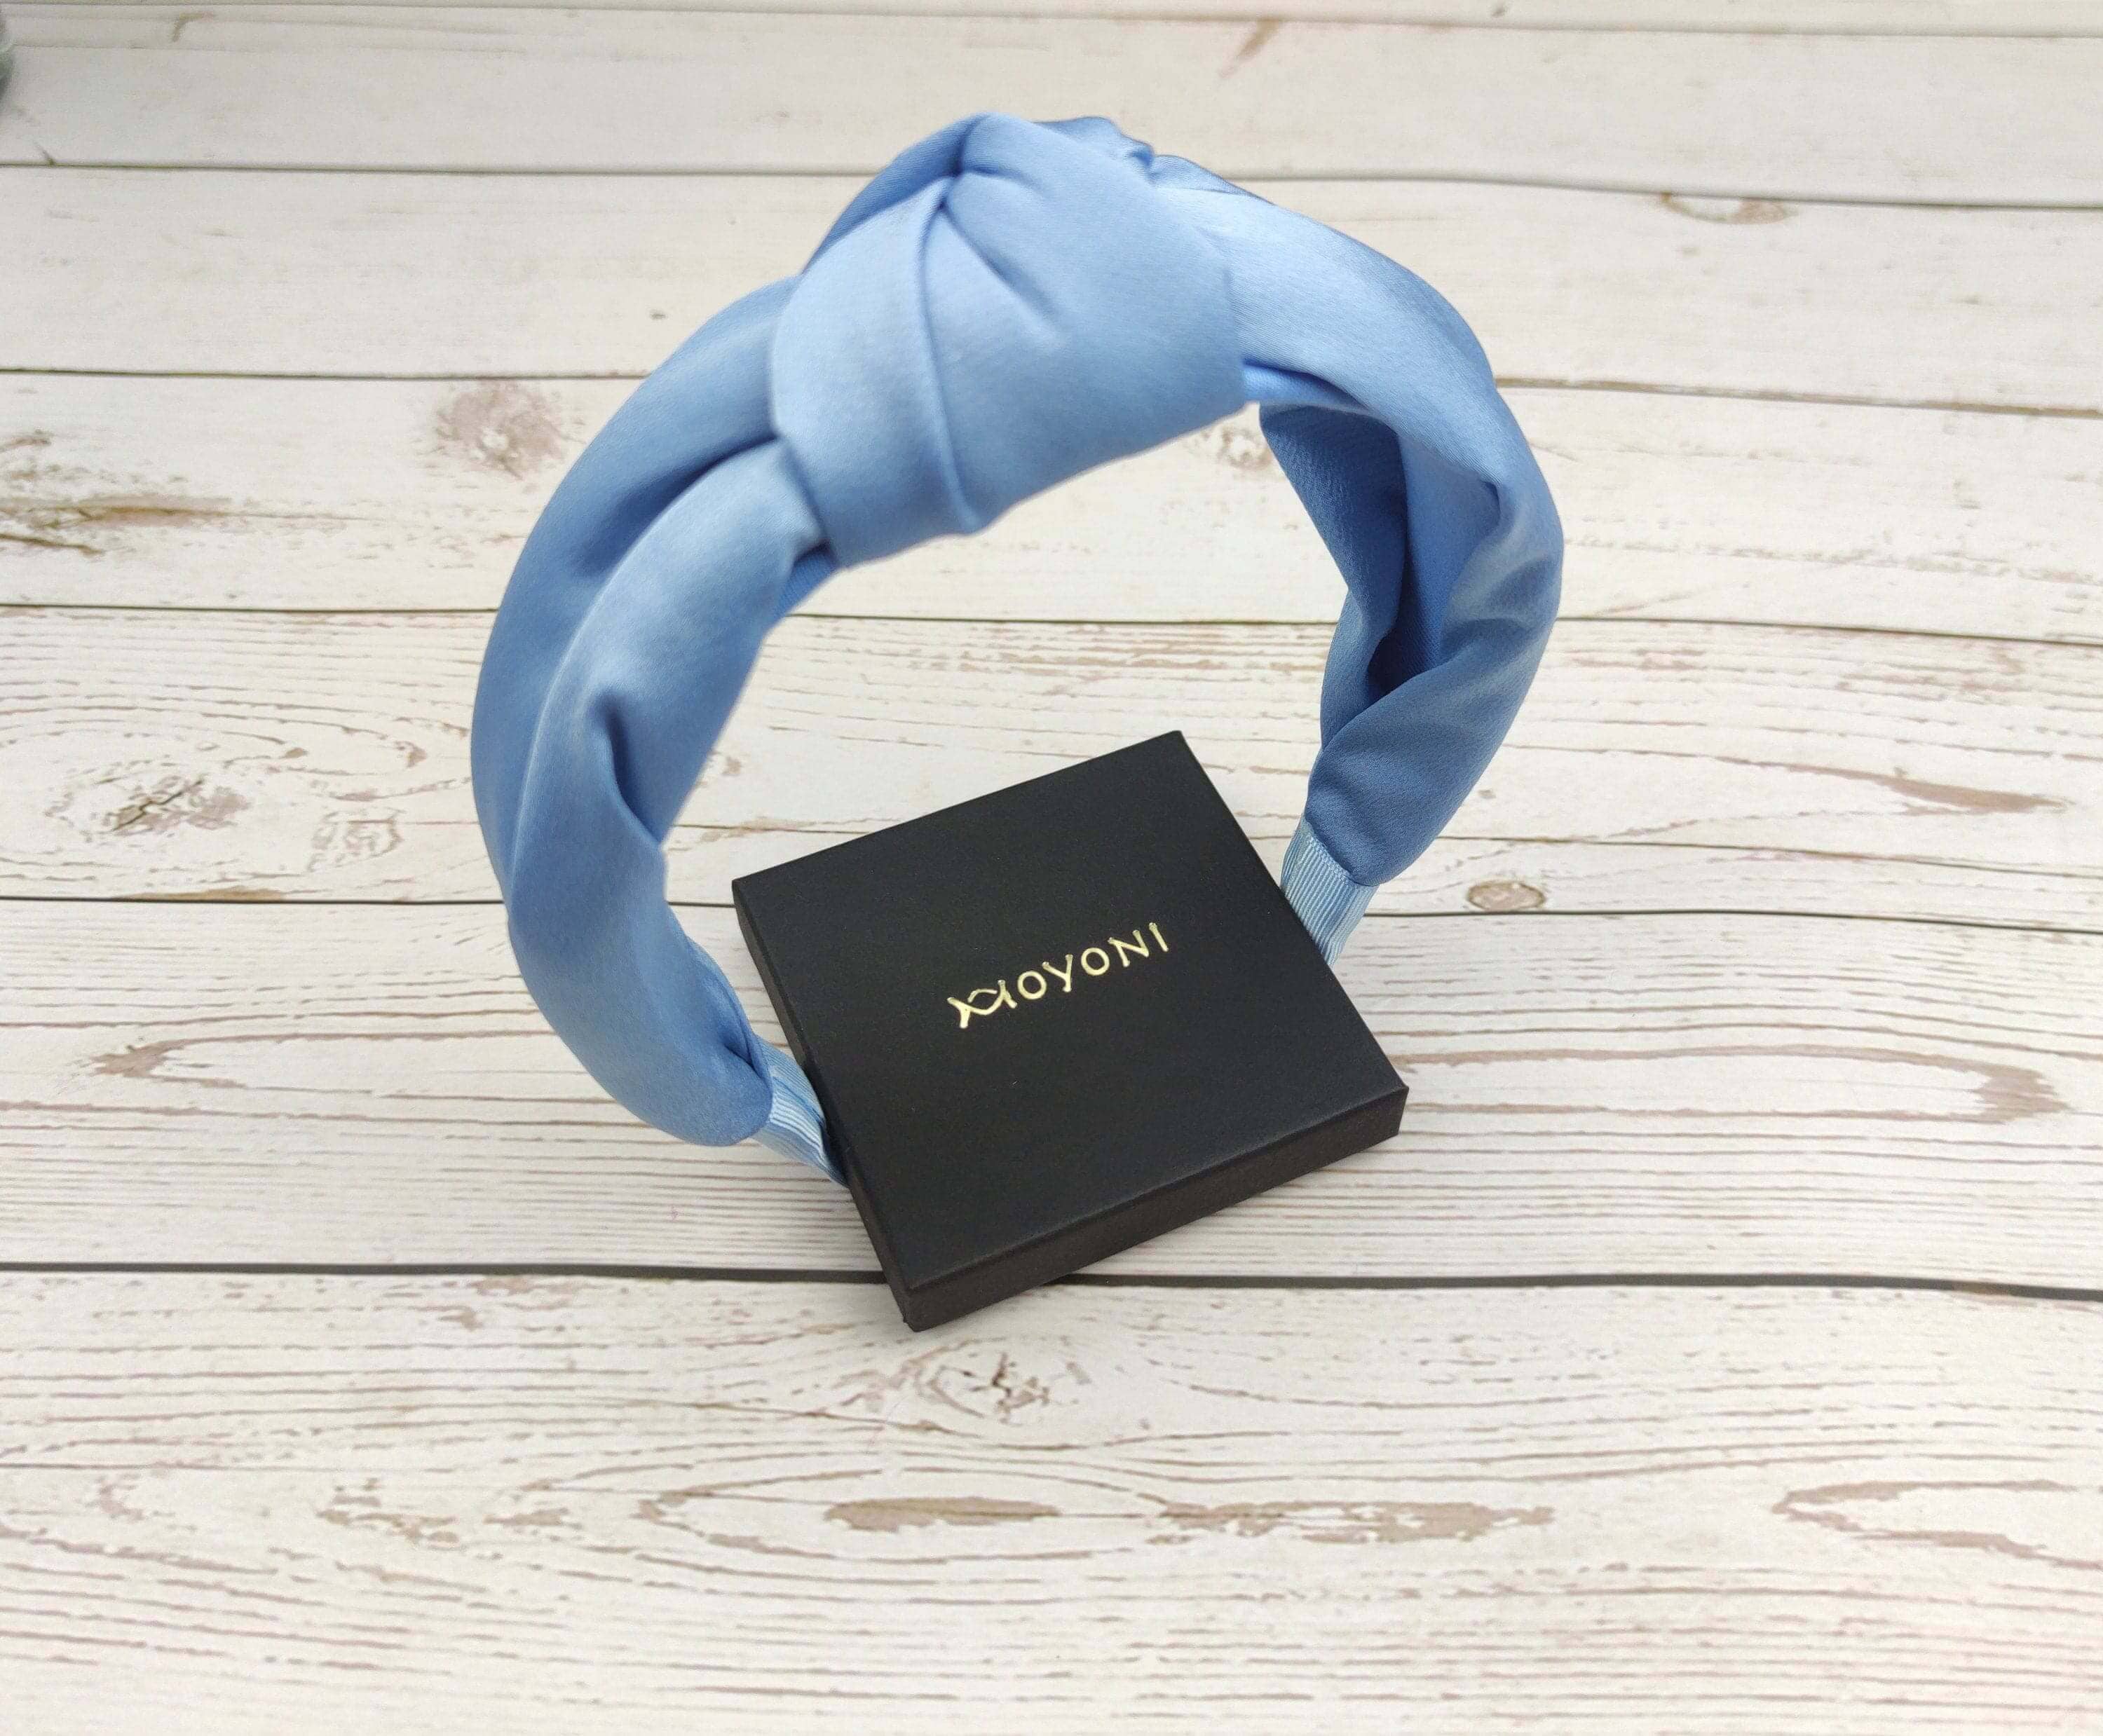 Get creative with your hairstyles with these knotted headbands. Add some personality to your everyday look with these quirky and beautiful handmade headbands.